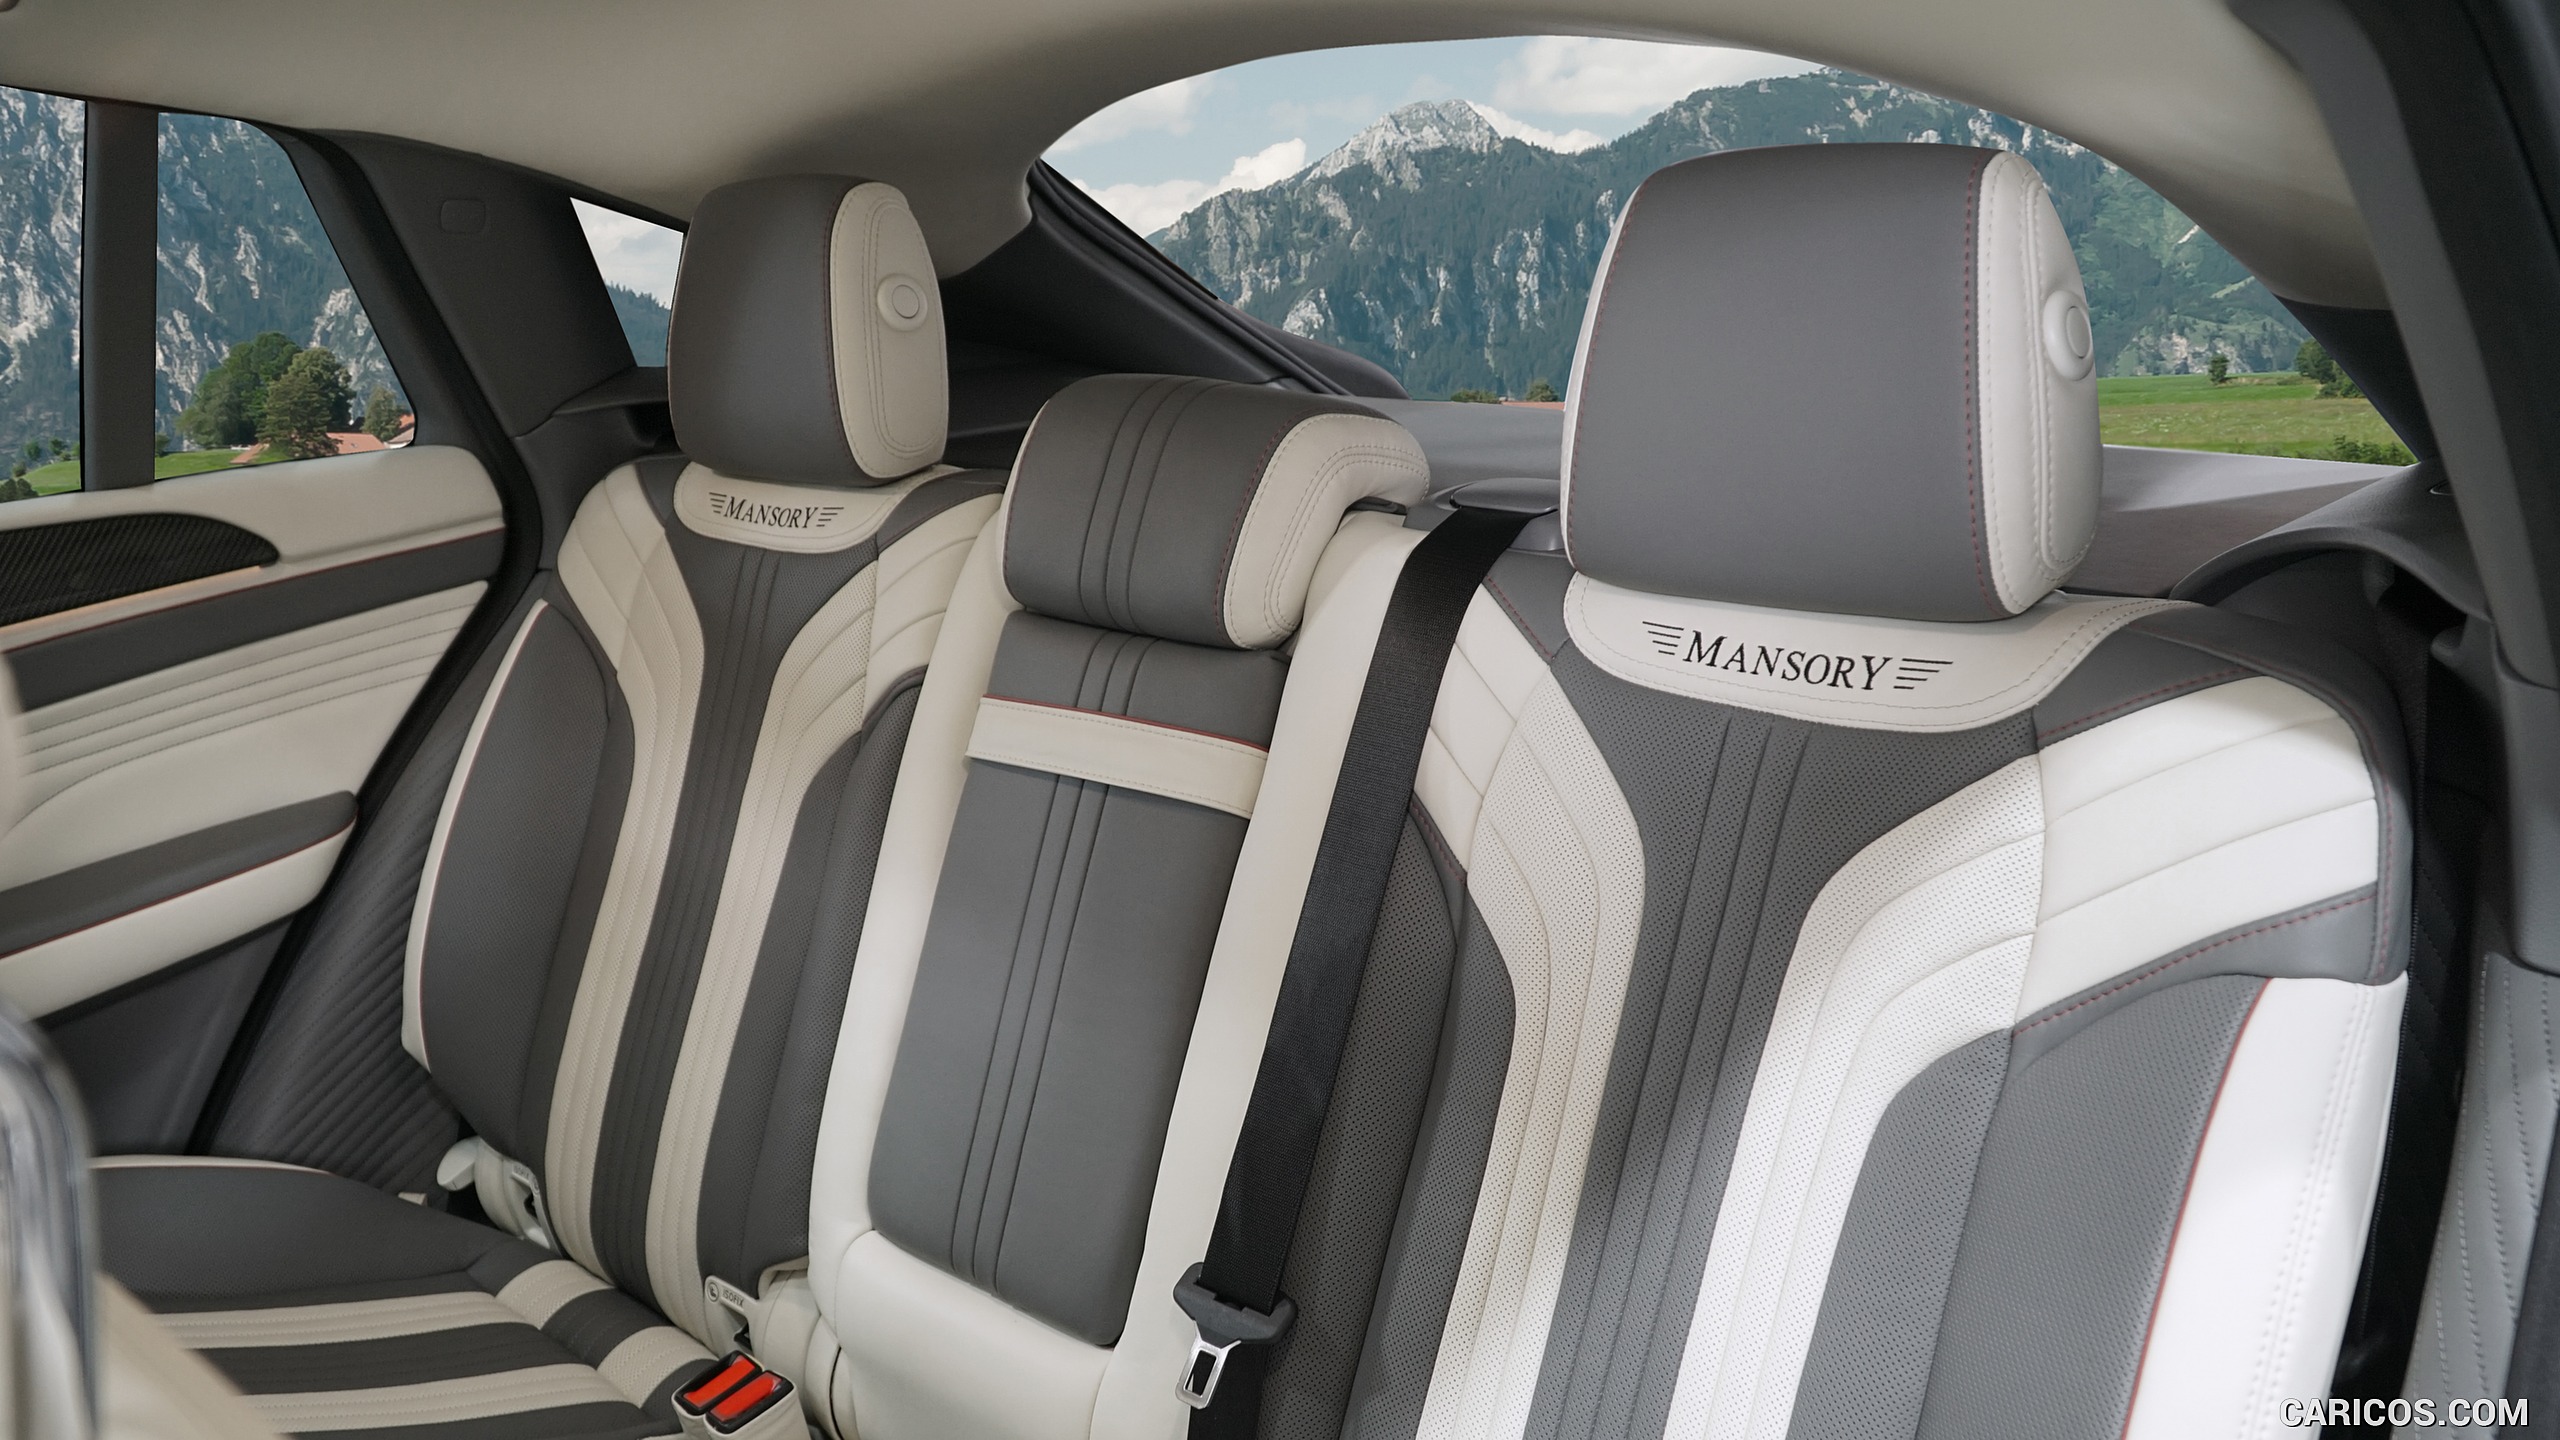 2016 MANSORY Mercedes-AMG GLE 63 Coupe - Interior, Rear Seats, #8 of 8